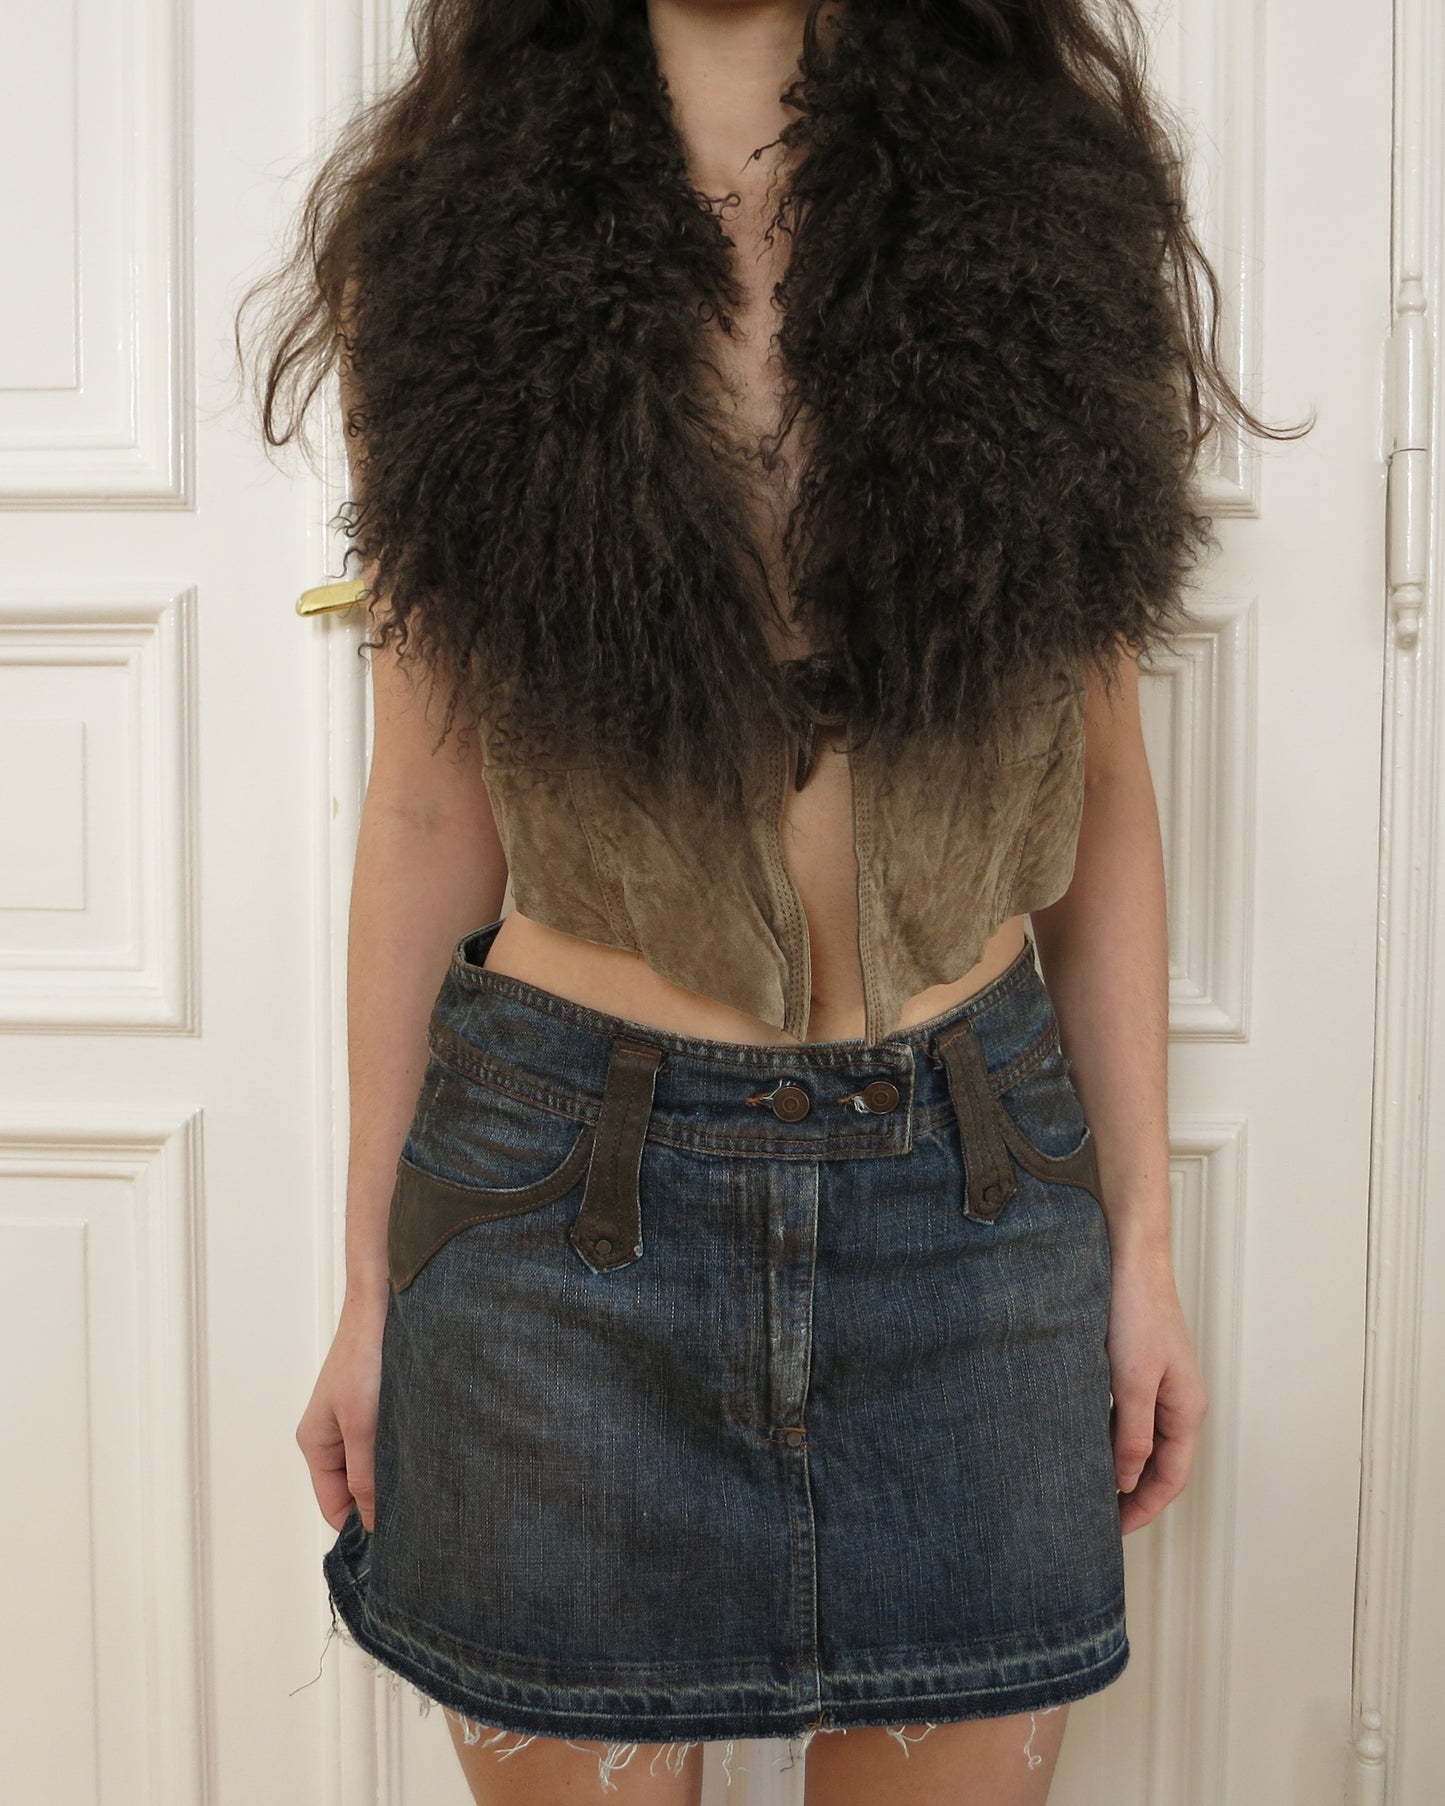 Leather vest with fur collar